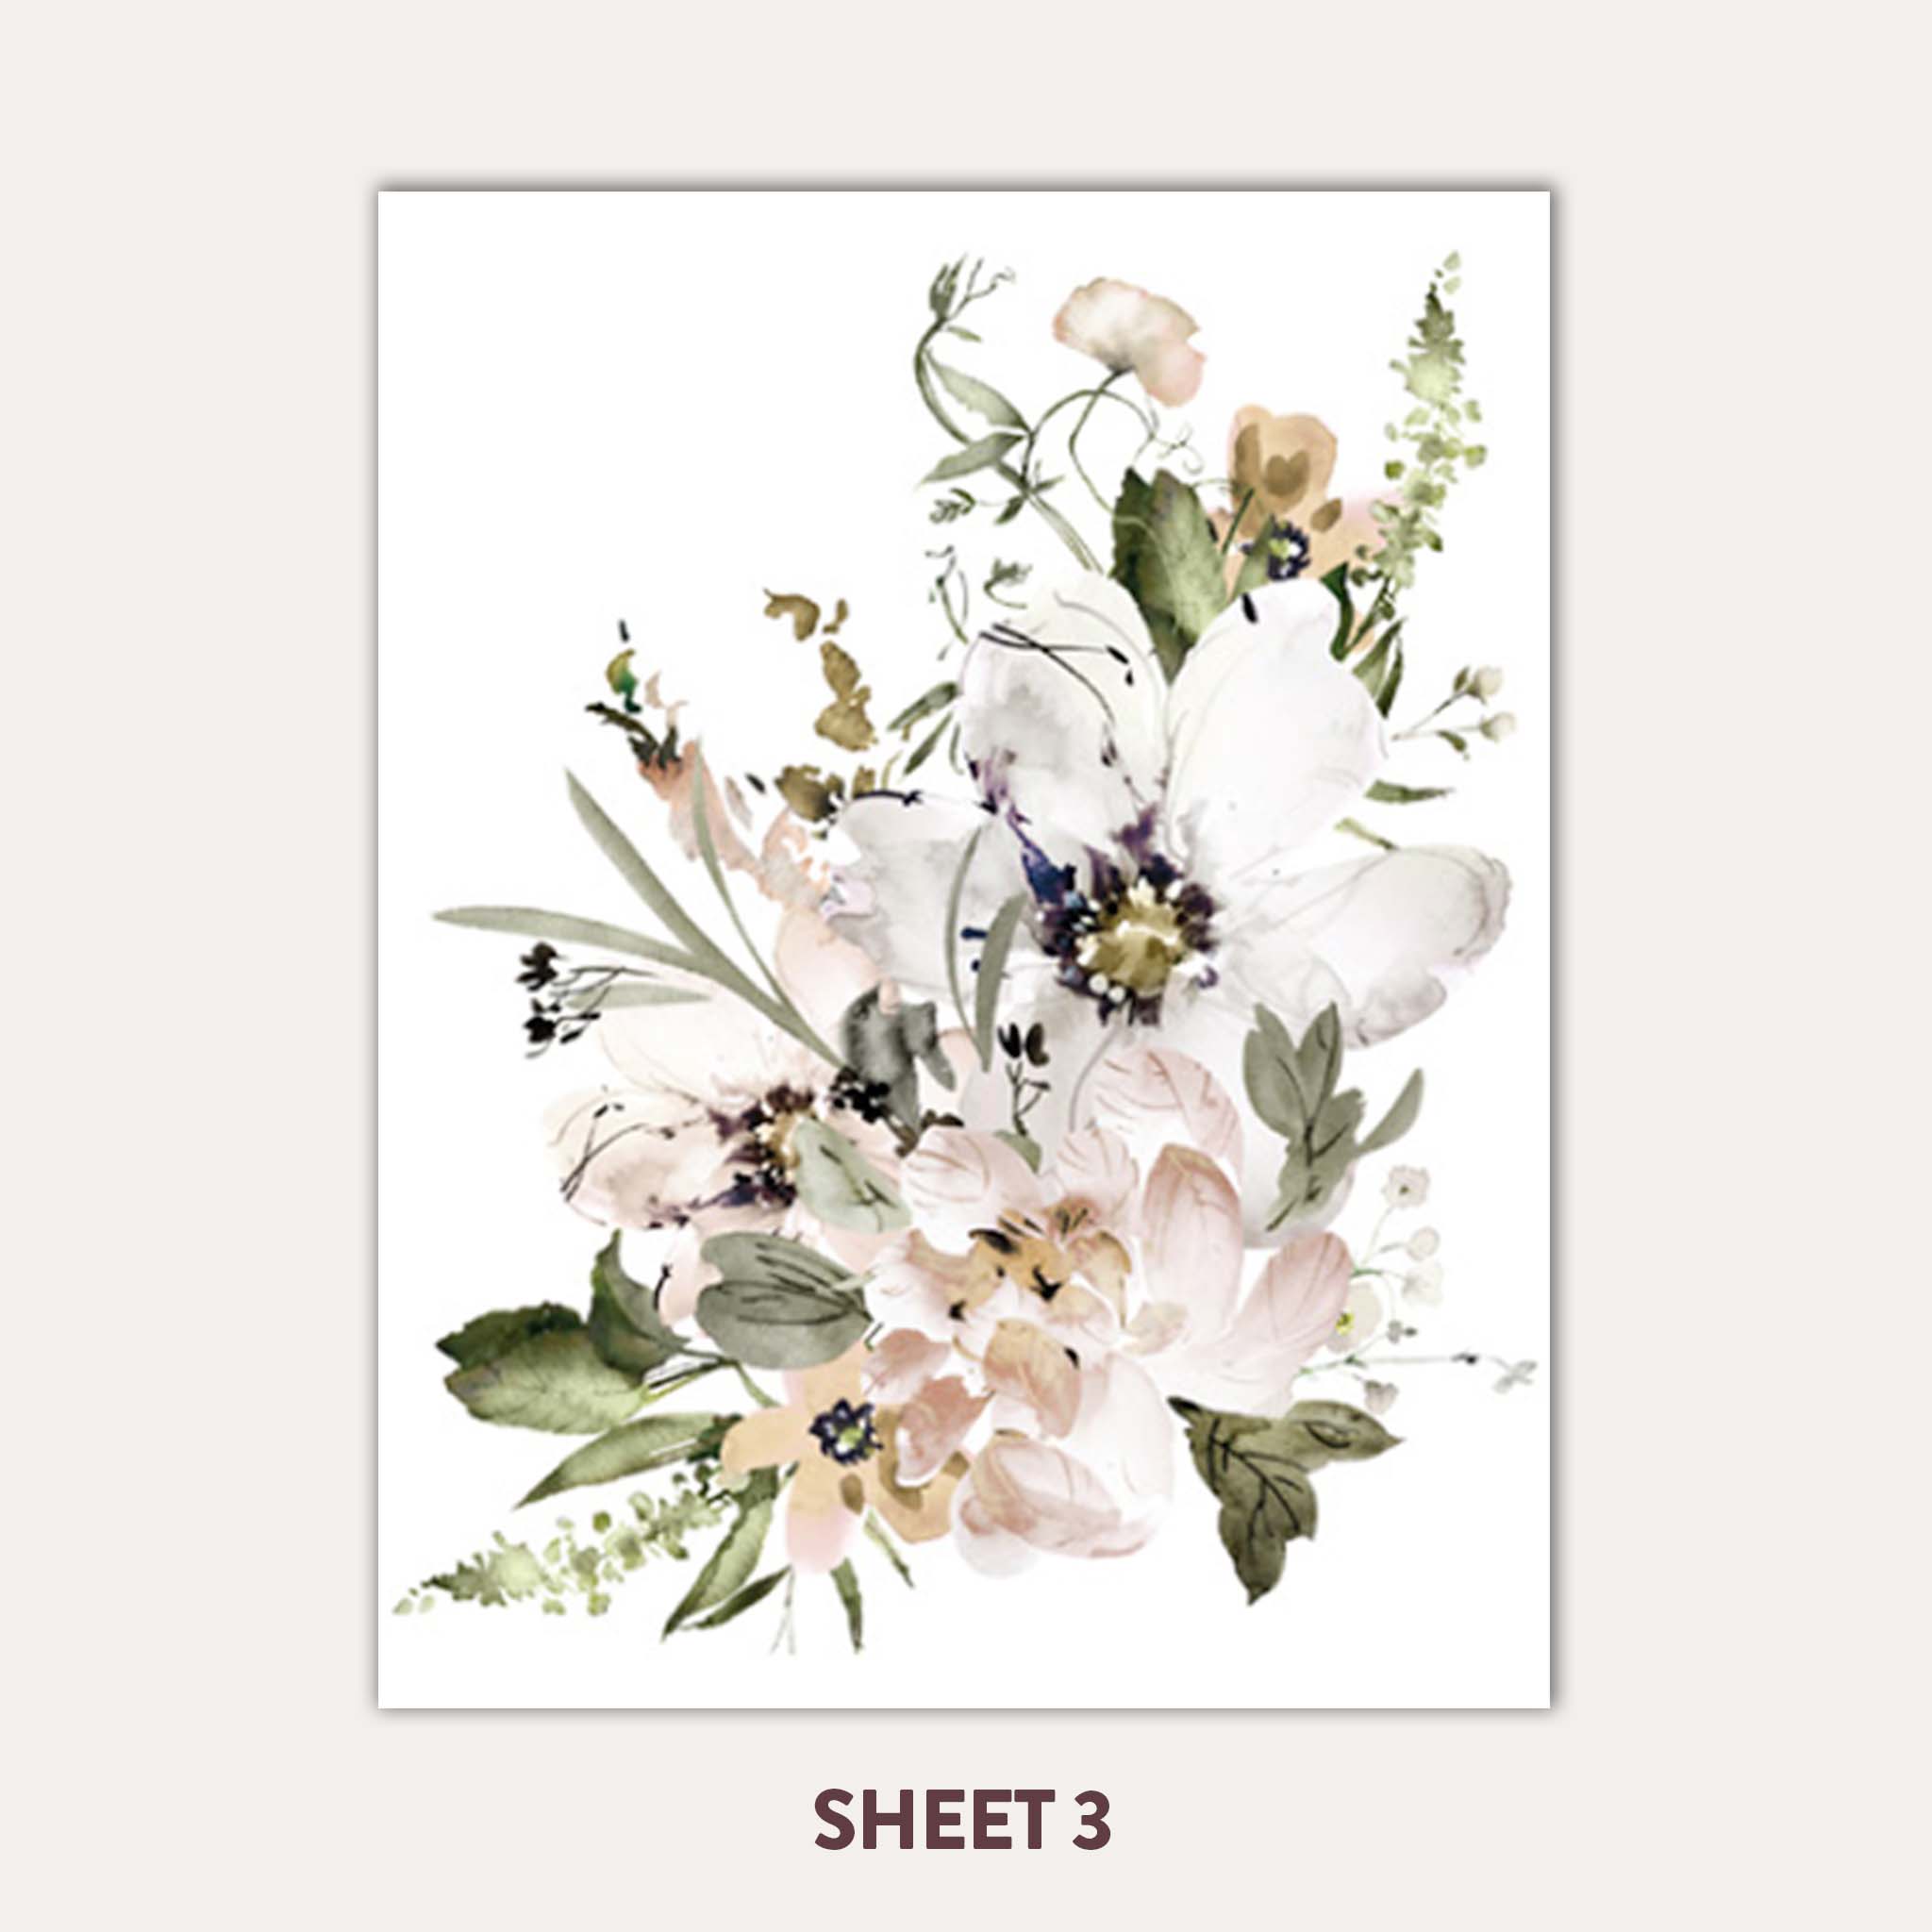 Sheet 3 of ReDesign with Prima's Pastels Artistry small transfer features a large bouquet of cream and blush florals.